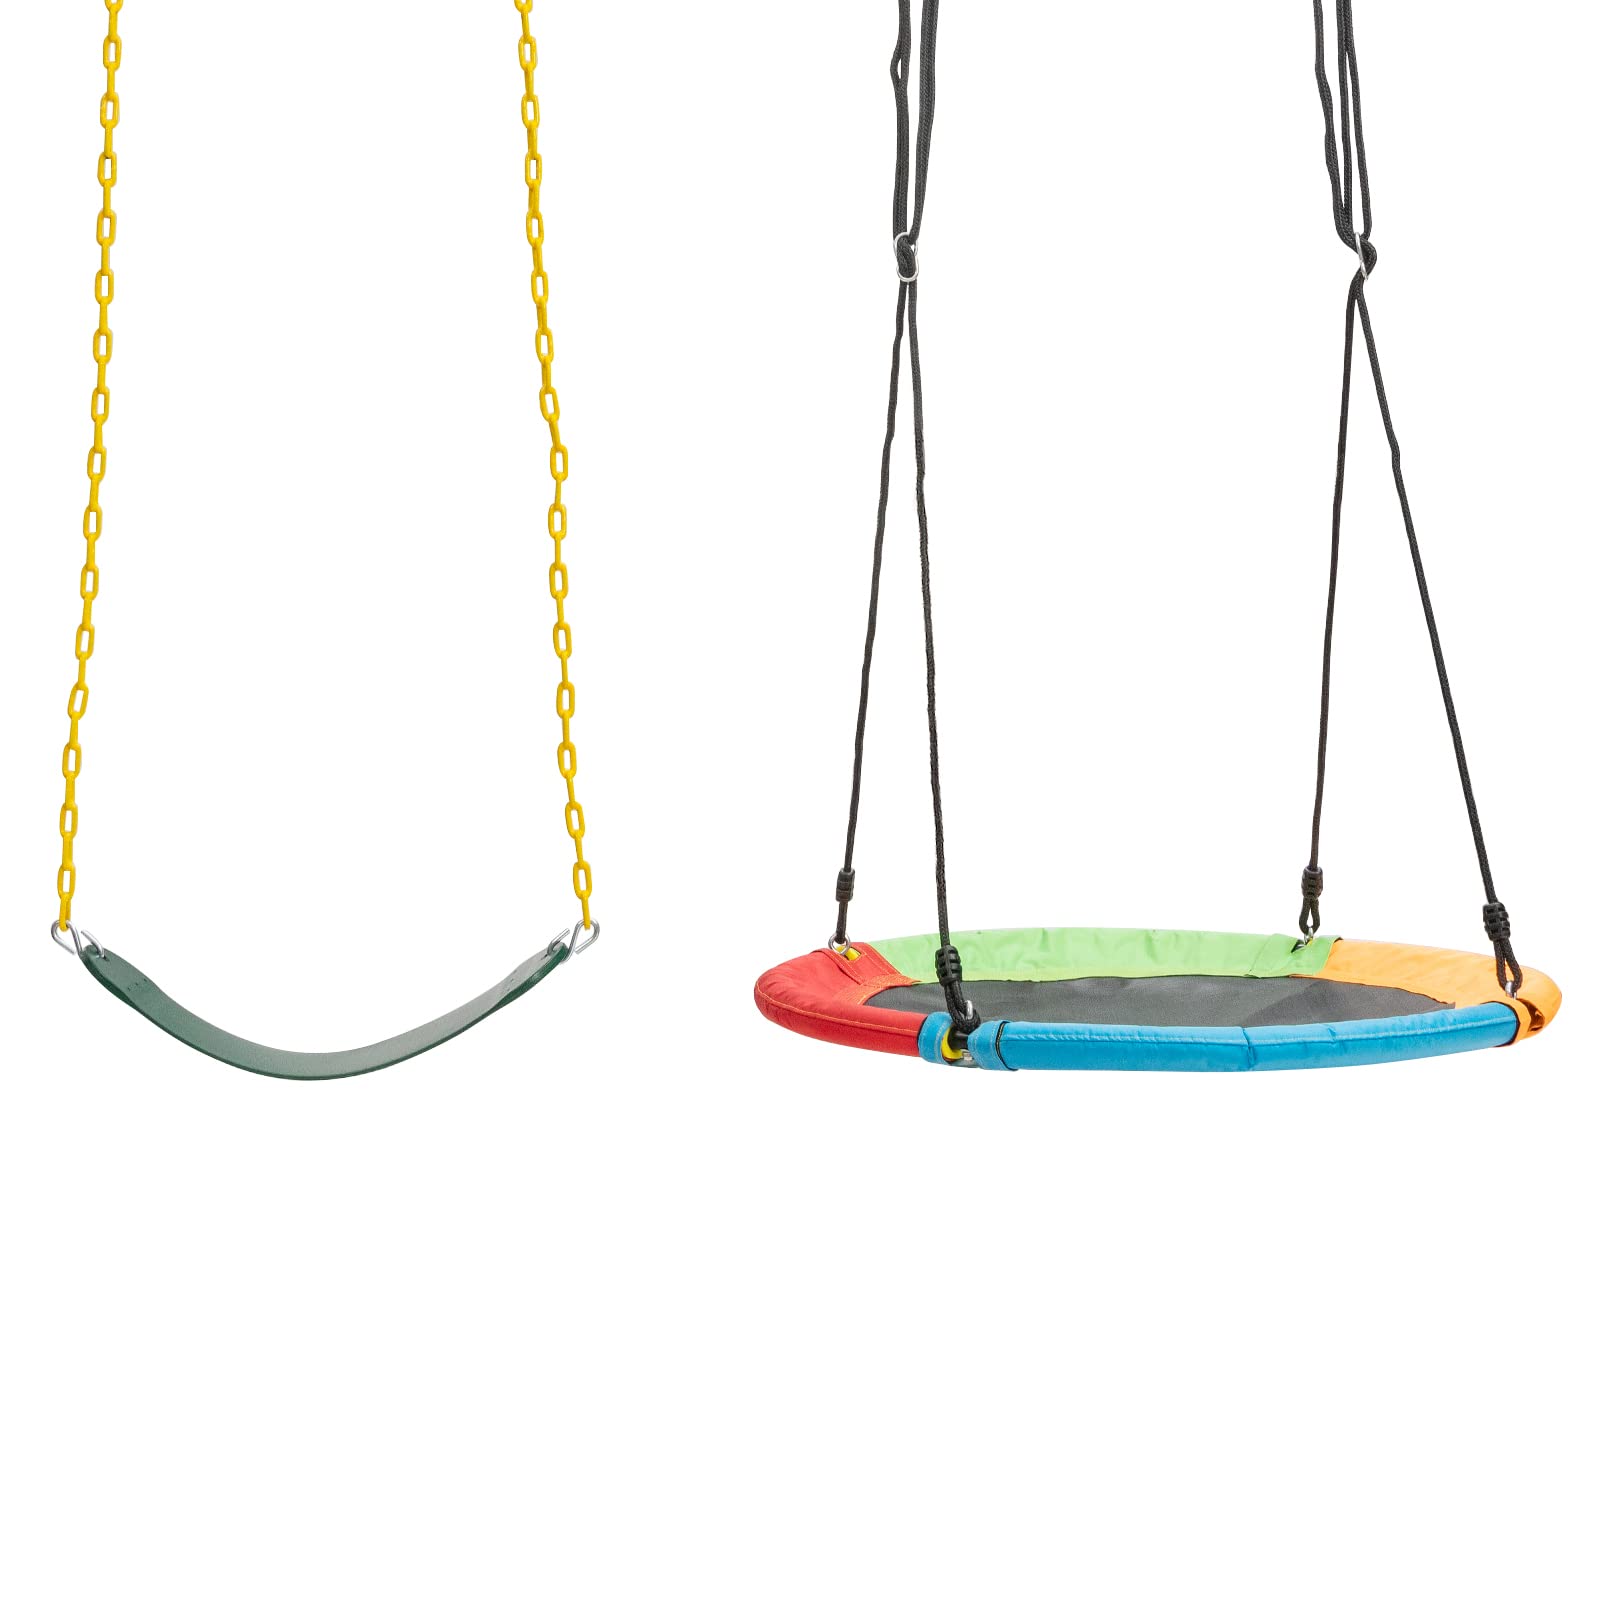 Goplus 40 Flying Saucer Tree Swing Indoor Outdoor Play Set Swing for Kids  colorful